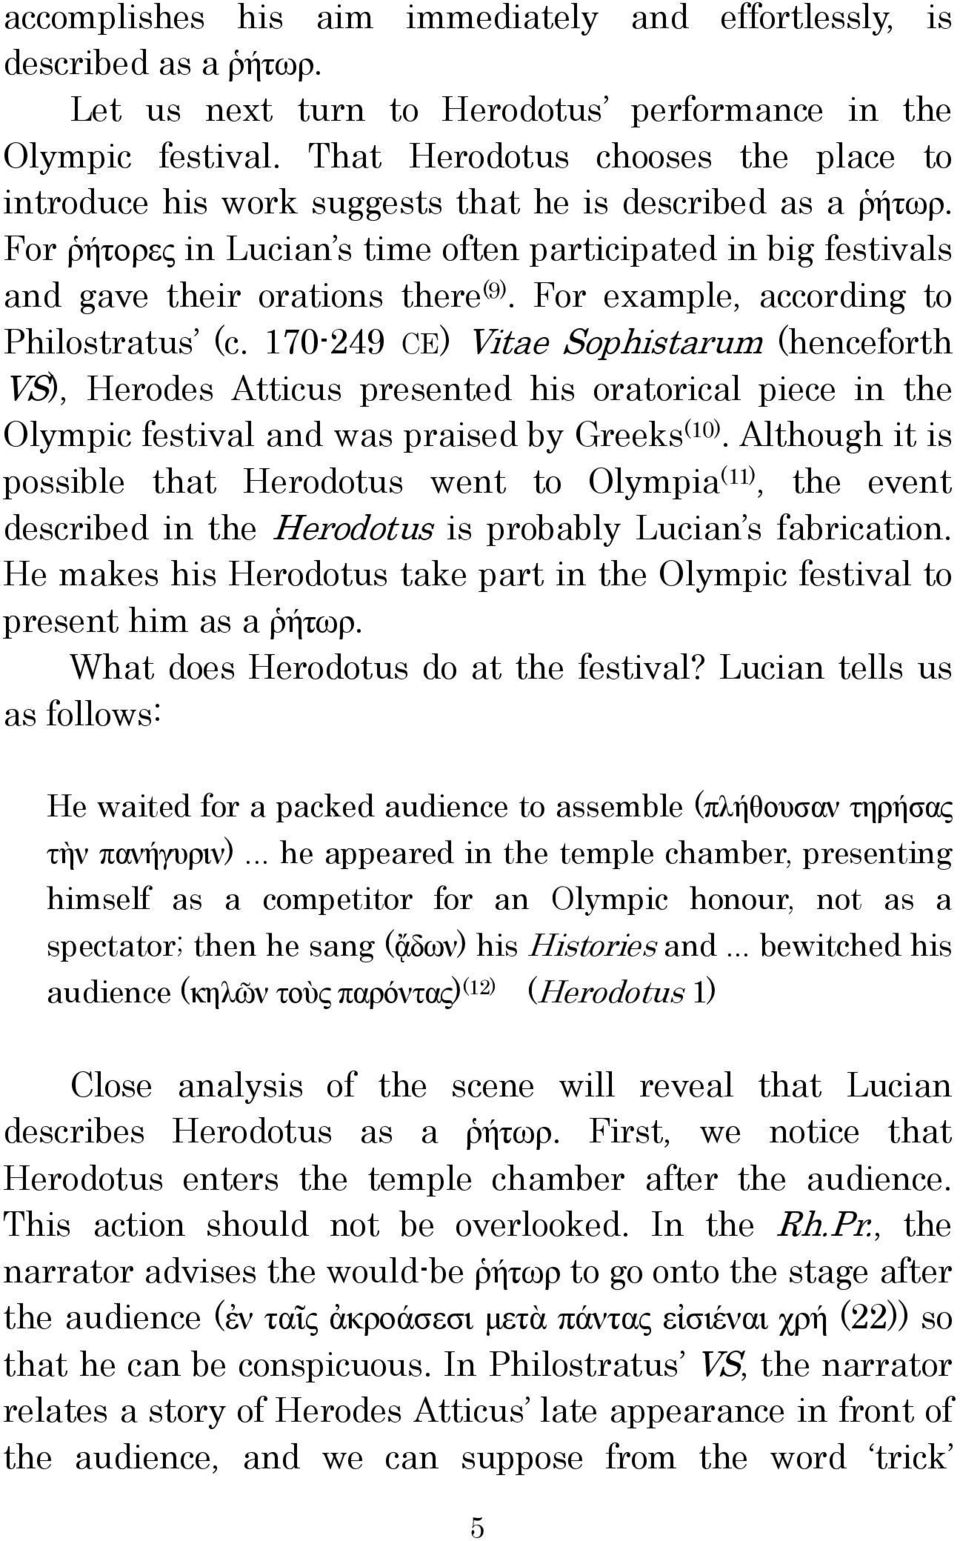 For example, according to Philostratus (c. 170-249 CE) Vitae Sophistarum (henceforth VS), Herodes Atticus presented his oratorical piece in the Olympic festival and was praised by Greeks (10).